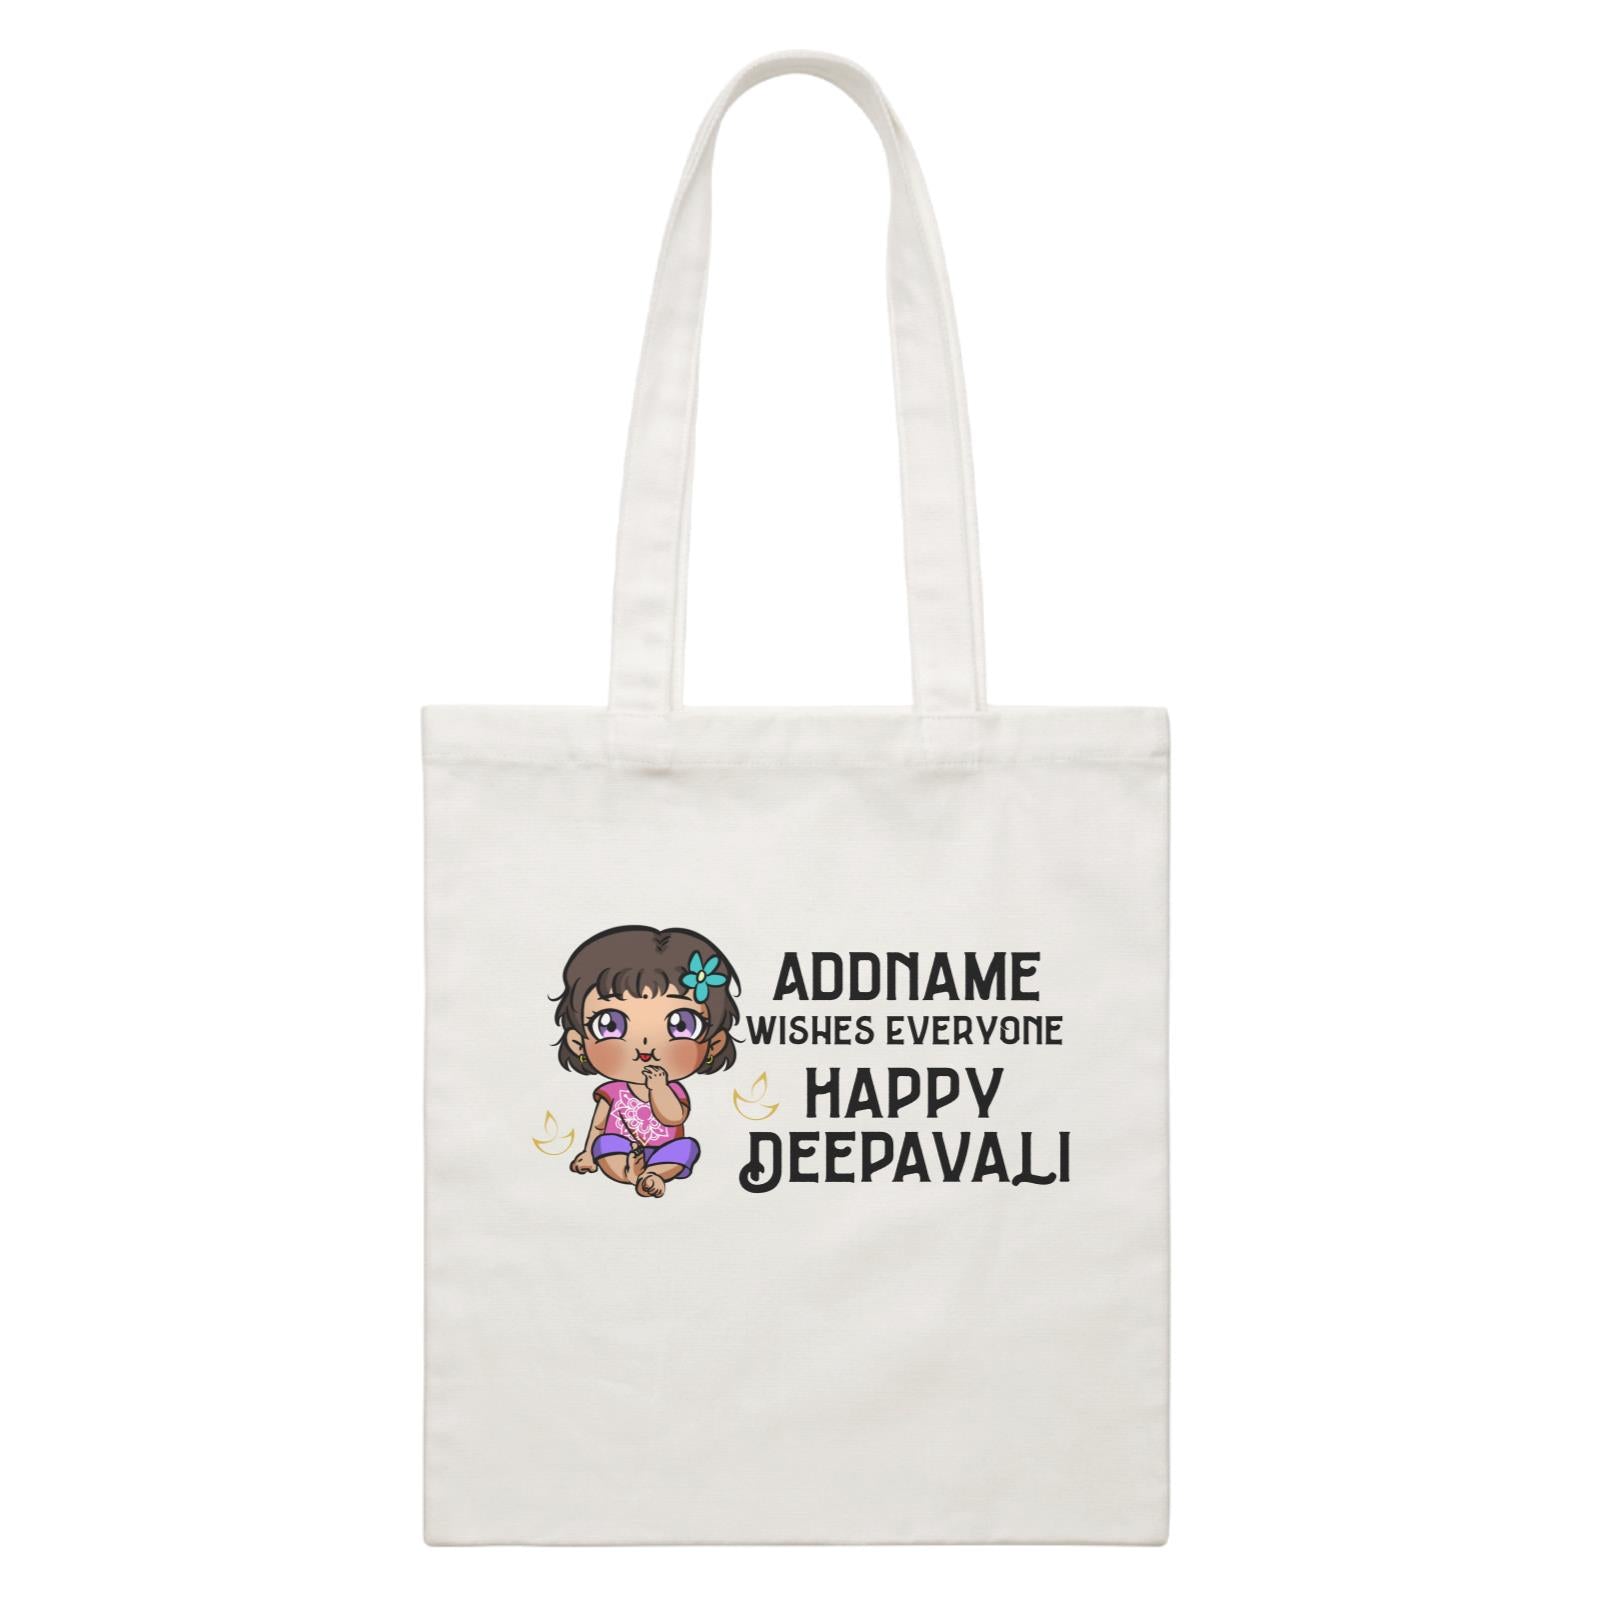 Deepavali Chibi Baby Girl Front Addname Wishes Everyone Deepavali White Canvas Bag